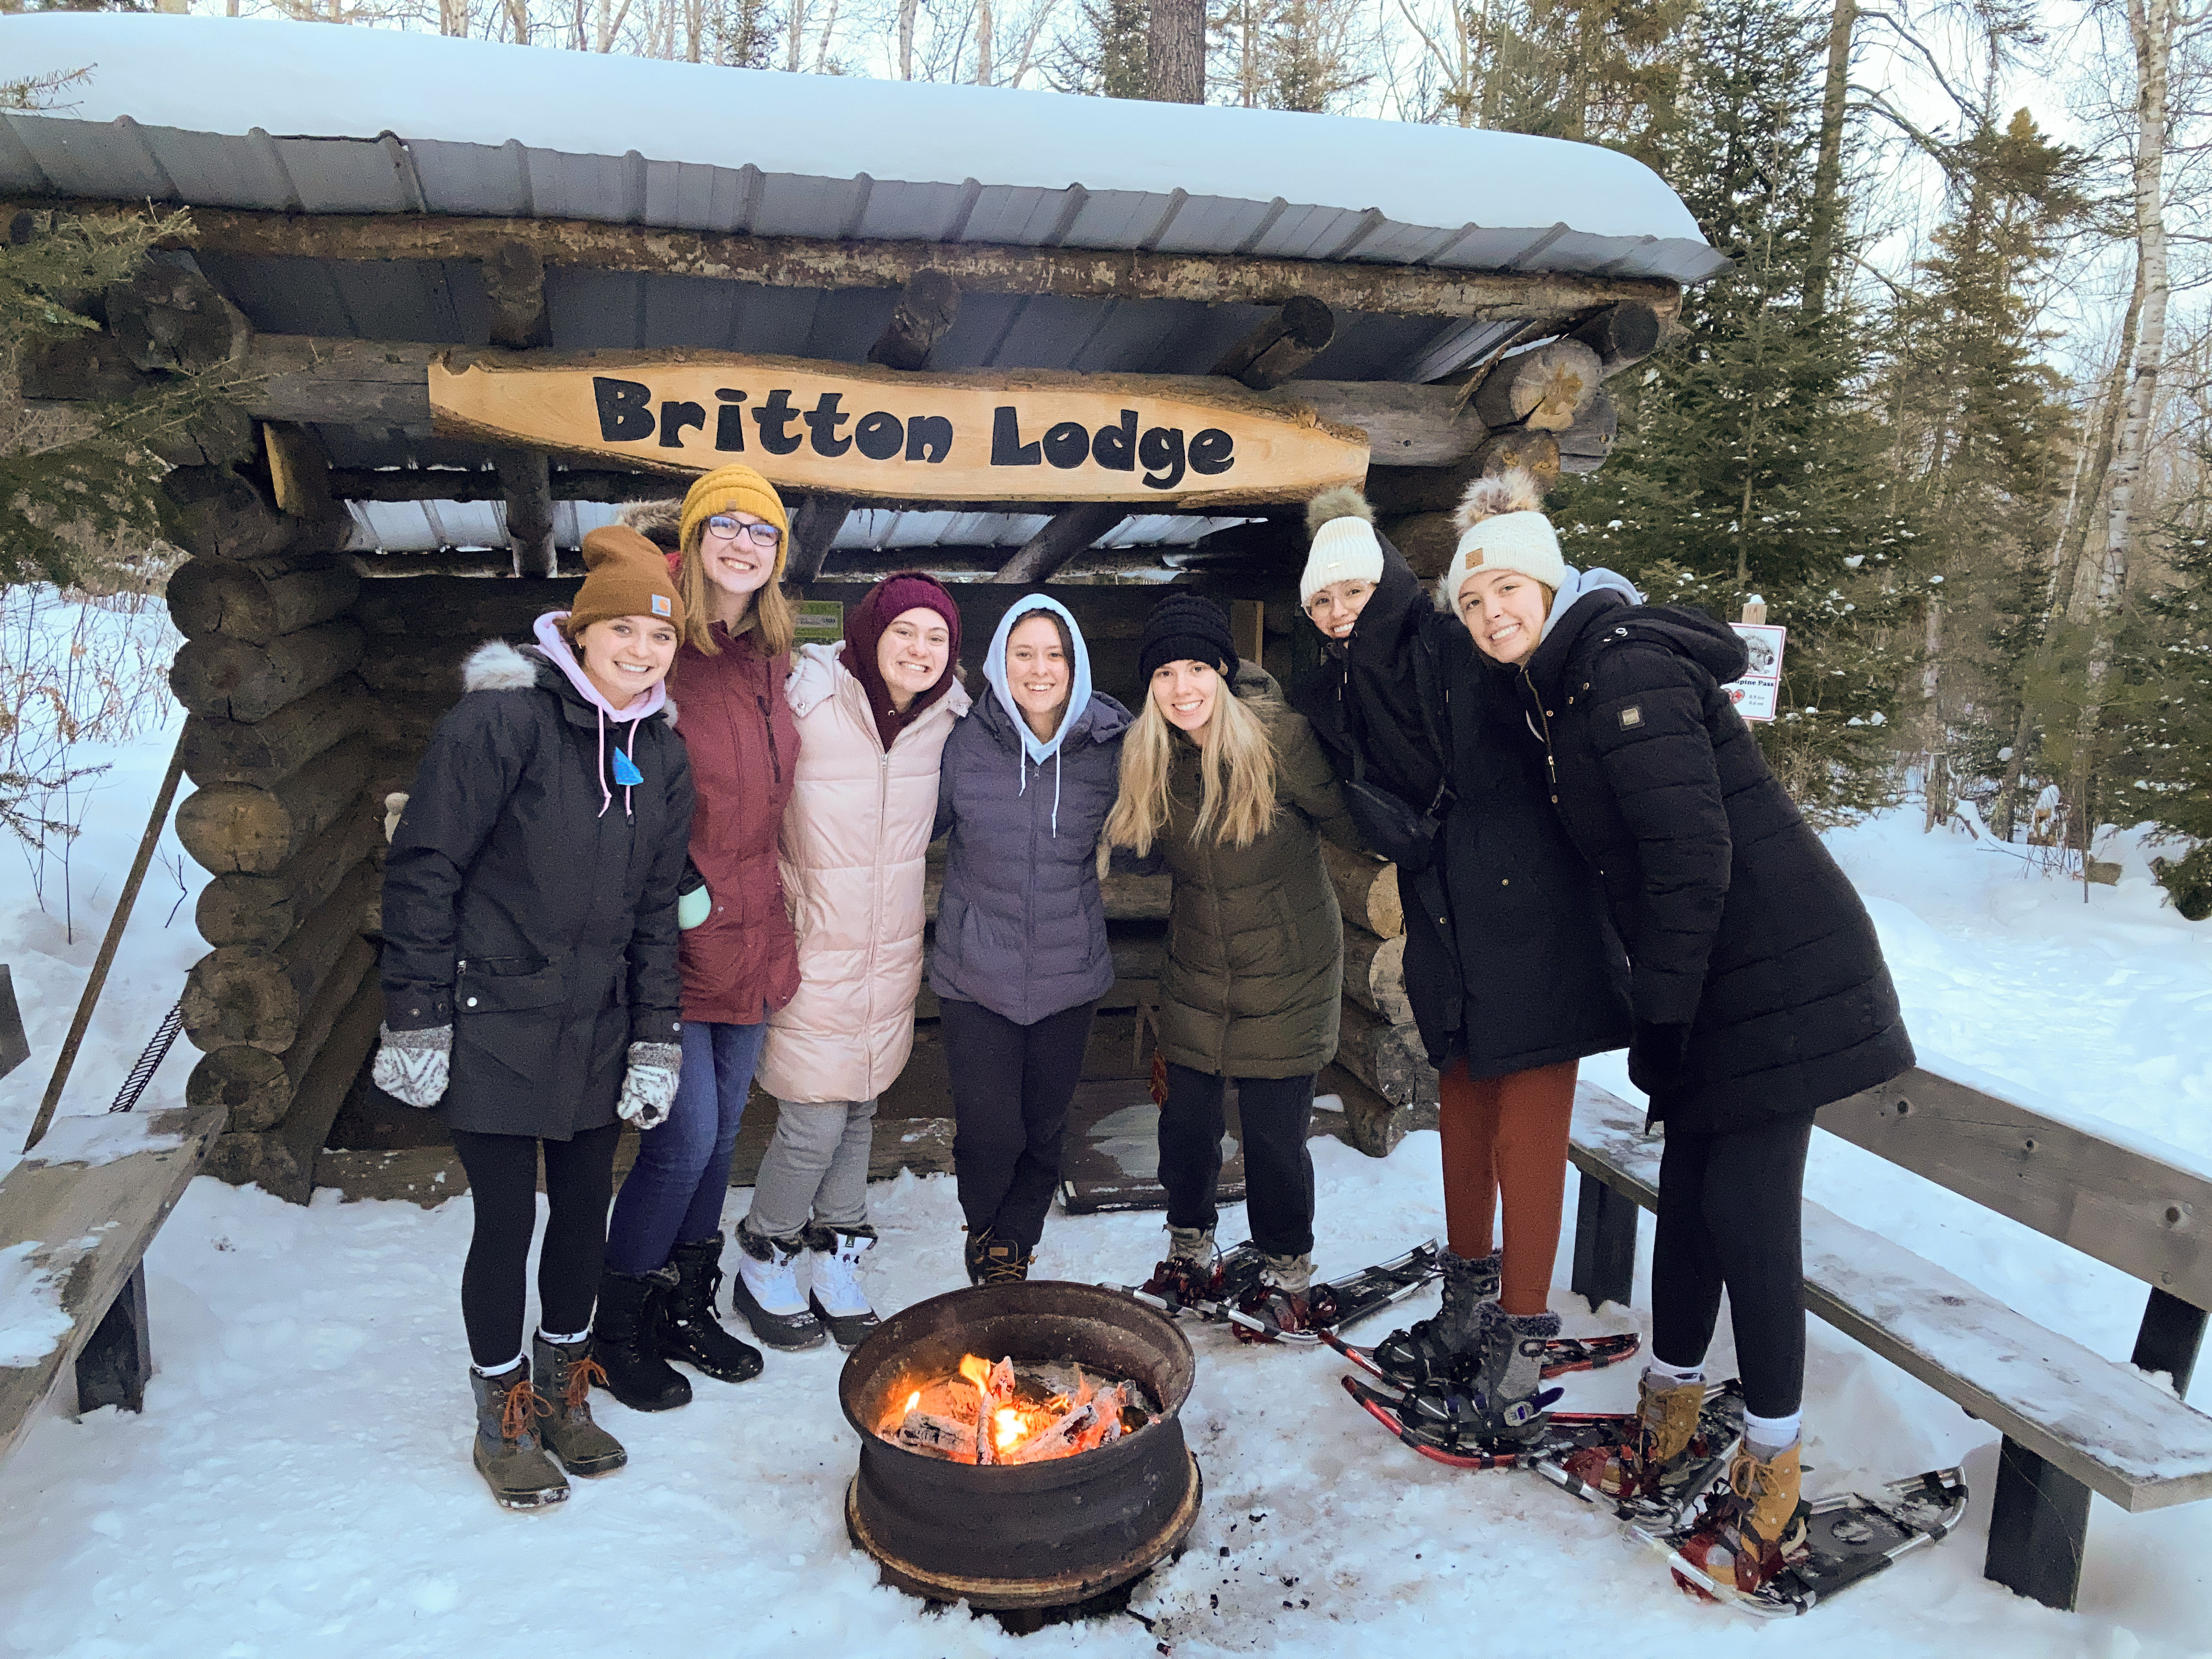 A group of college students in front of a campfire, with a sign in the background reading "Britton Lodge."